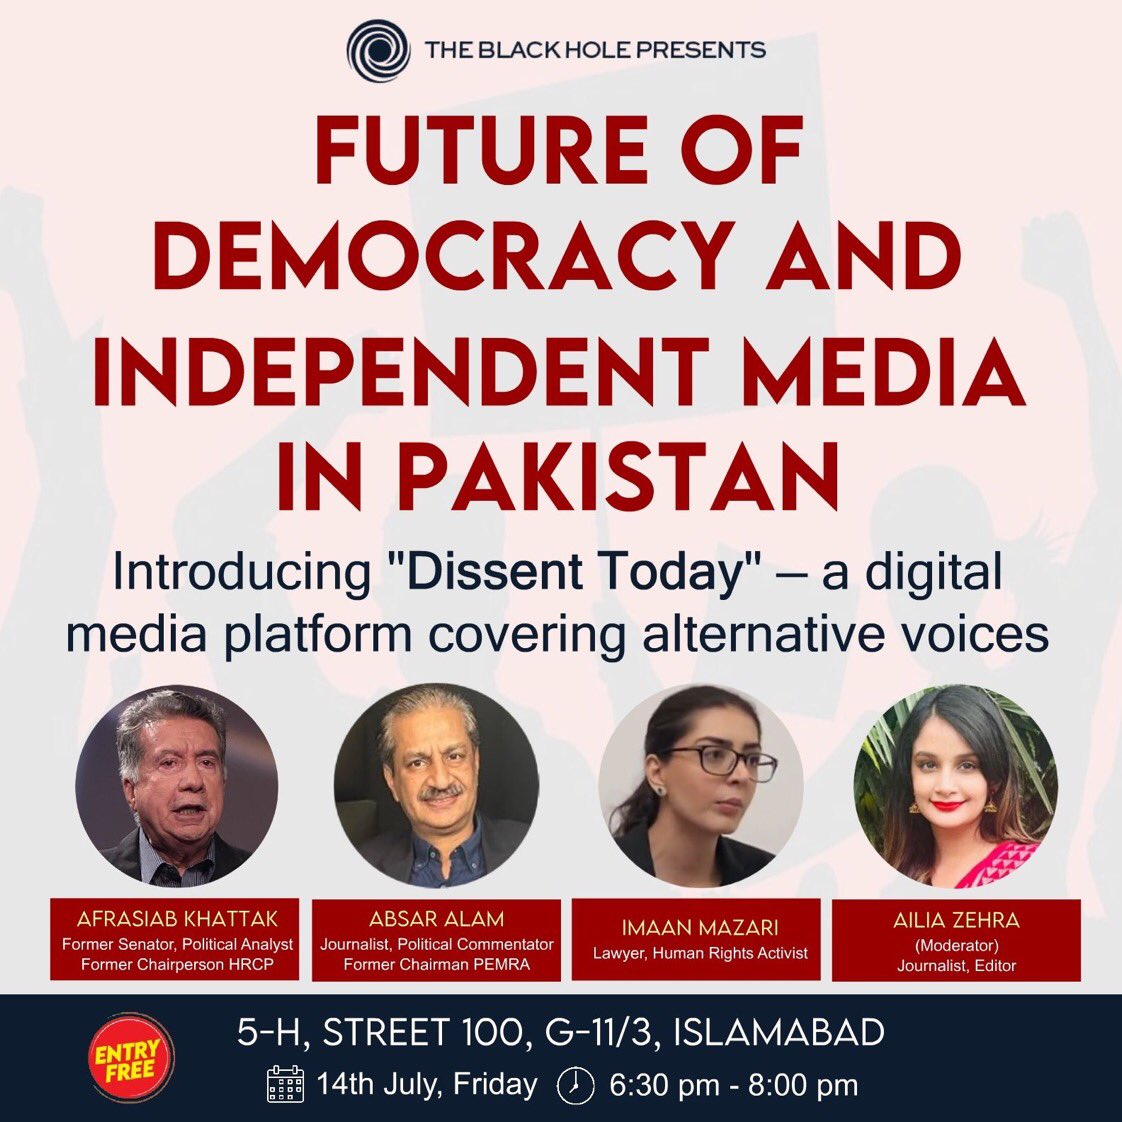 📢 Join @AiliaZehra, @a_siab, @AbsarAlamHaider, and @ImaanZHazir in a captivating conversation on democracy, media, and dissent! Happening this Friday at Black Hole community center in Islamabad. Don't miss out if you're in the city! 🗣️ #Islamabad #DemocracyTalks